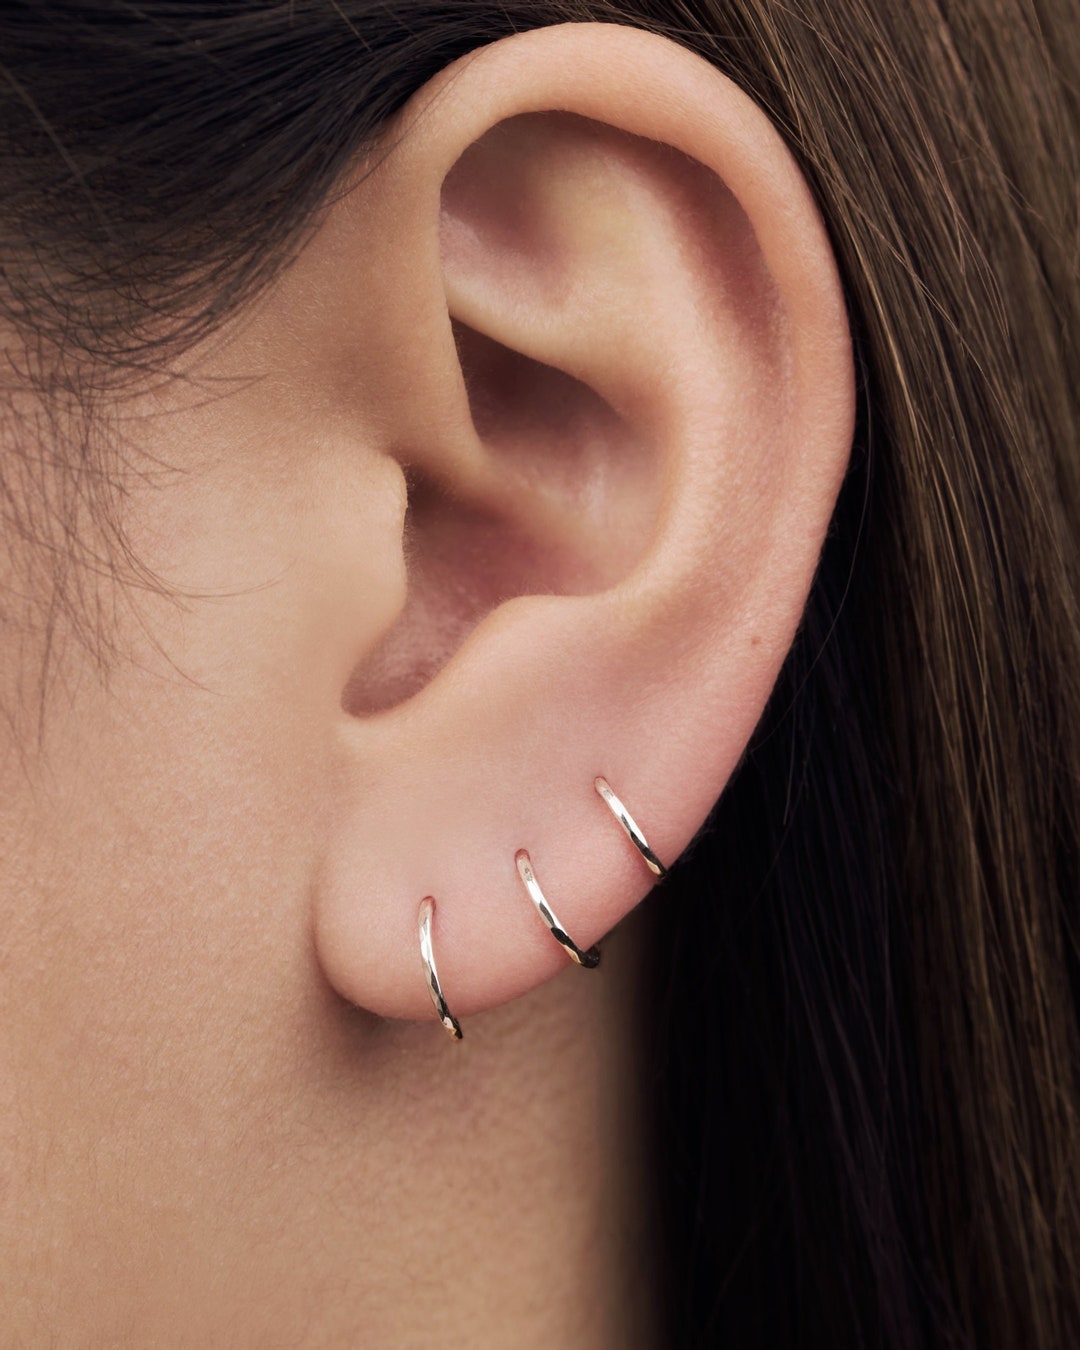  Fake Double Hoop Earrings for Single Pierced Ears in 14K Gold  Filled, Rose Gold Filled or Solid Sterling Silver. Faux Double Mini Ear  Huggie Hoops : Handmade Products